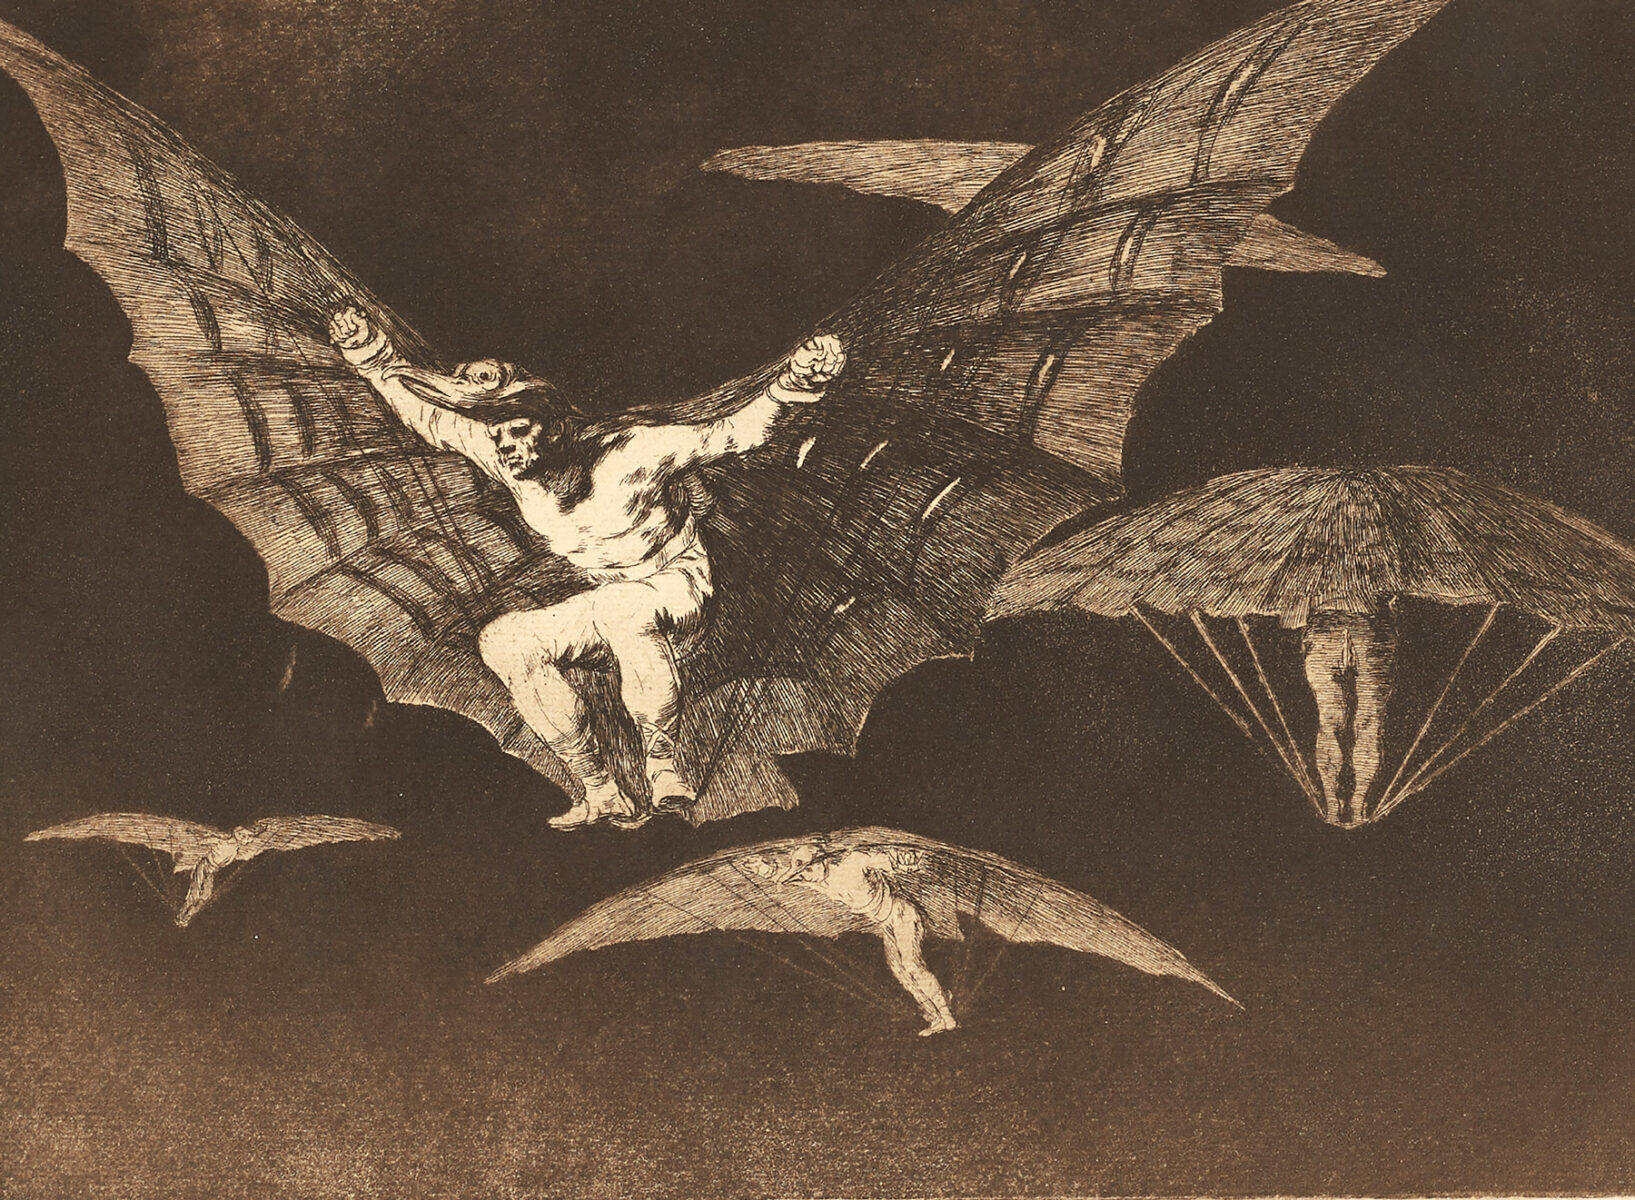 Etching by Goya with several figures flying using large bat-shaped wings.